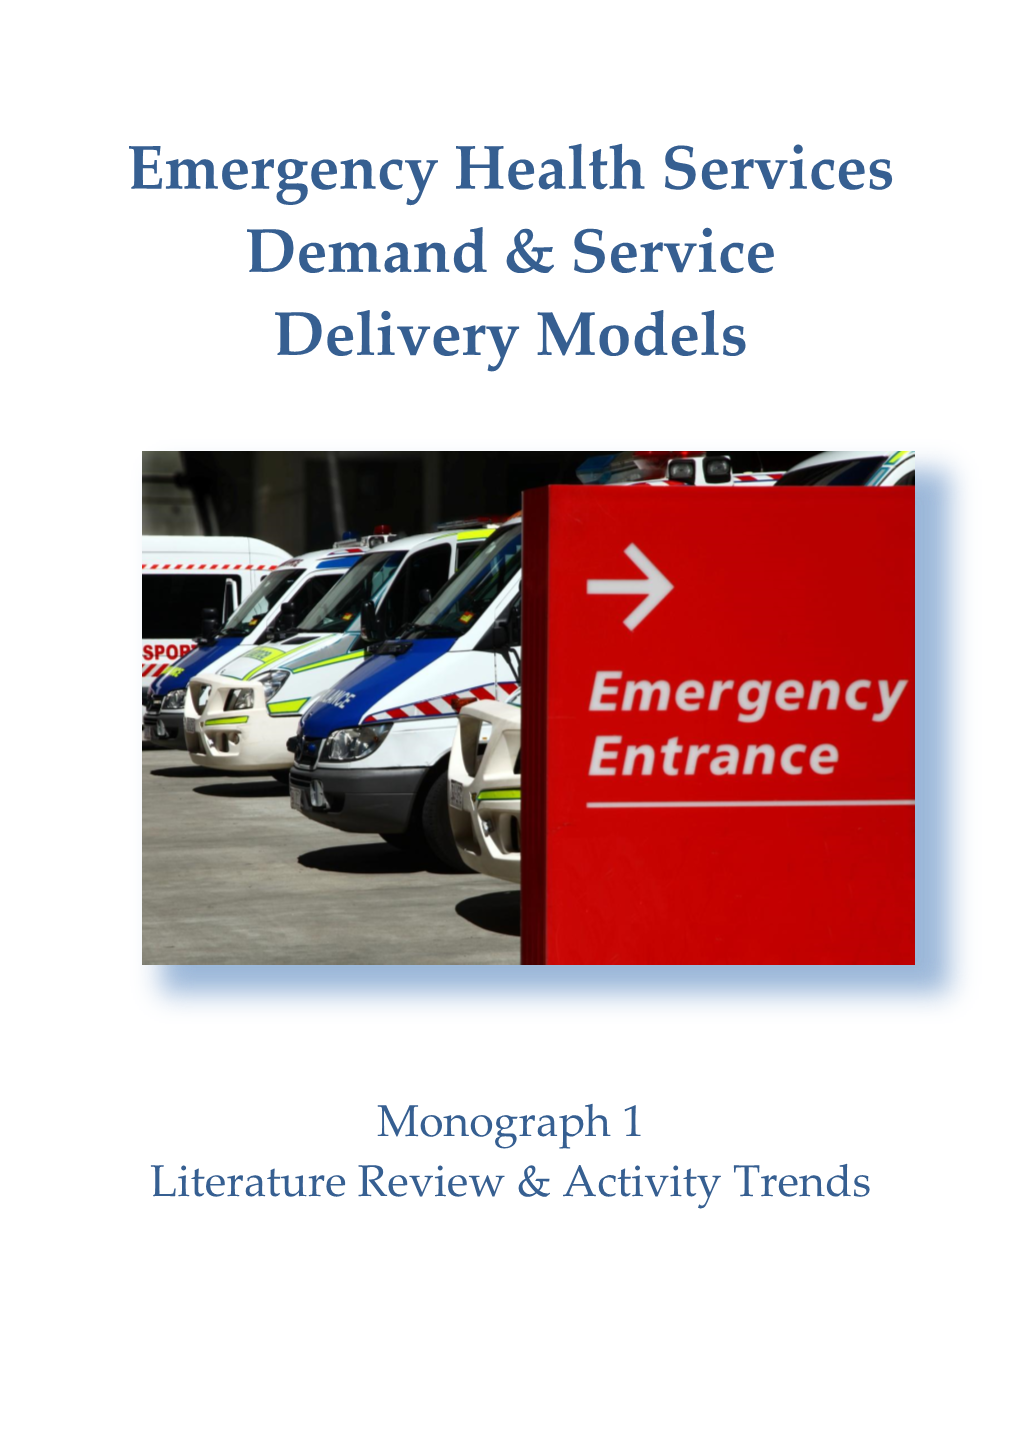 Emergency Health Services Demand & Service Delivery Models